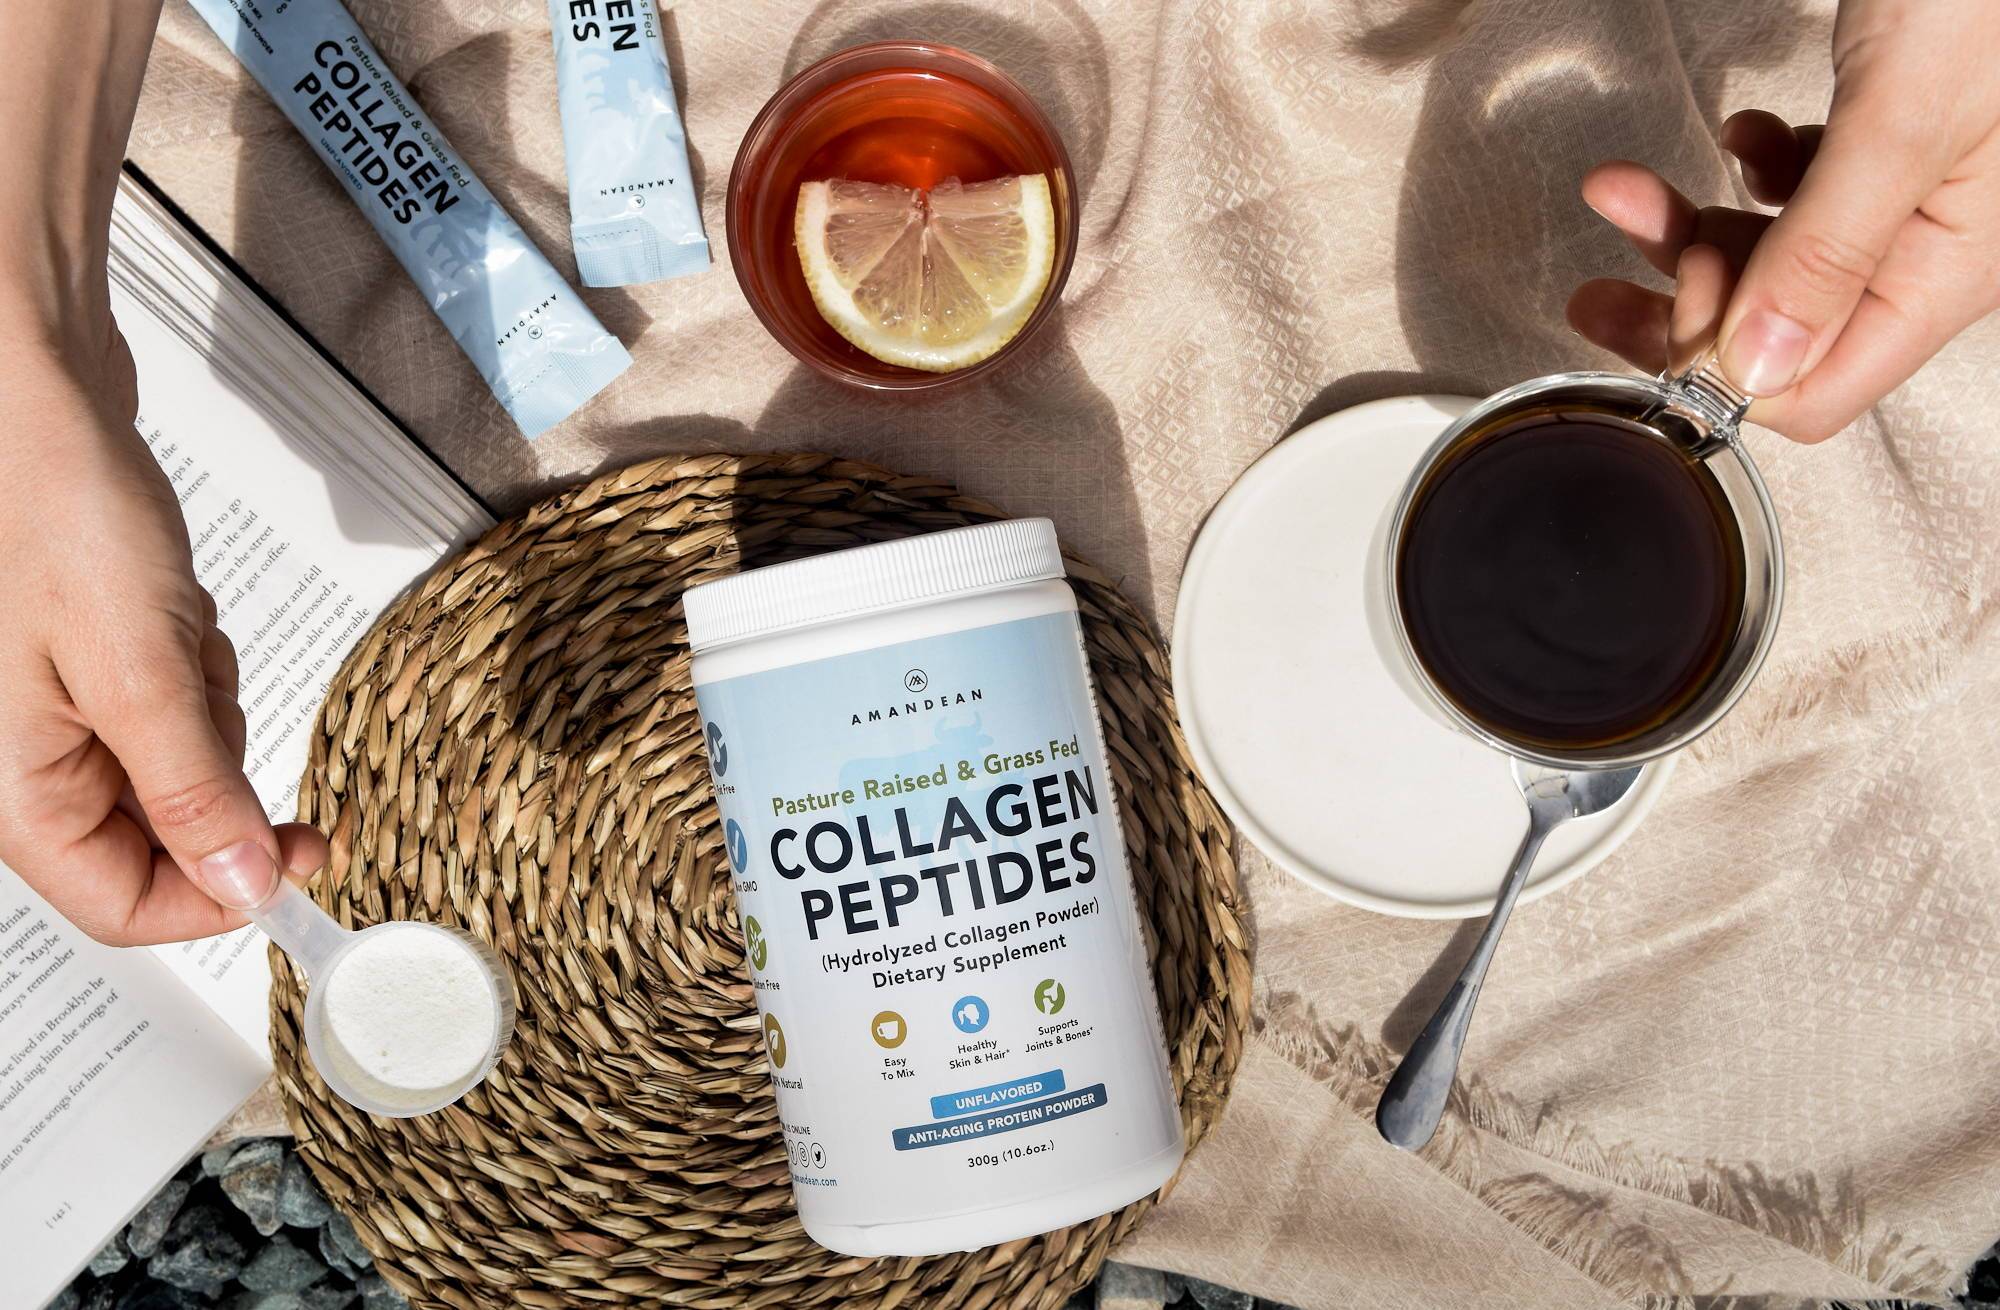 What’s the difference between Collagen Peptides and Hydrolyzed Collagen?